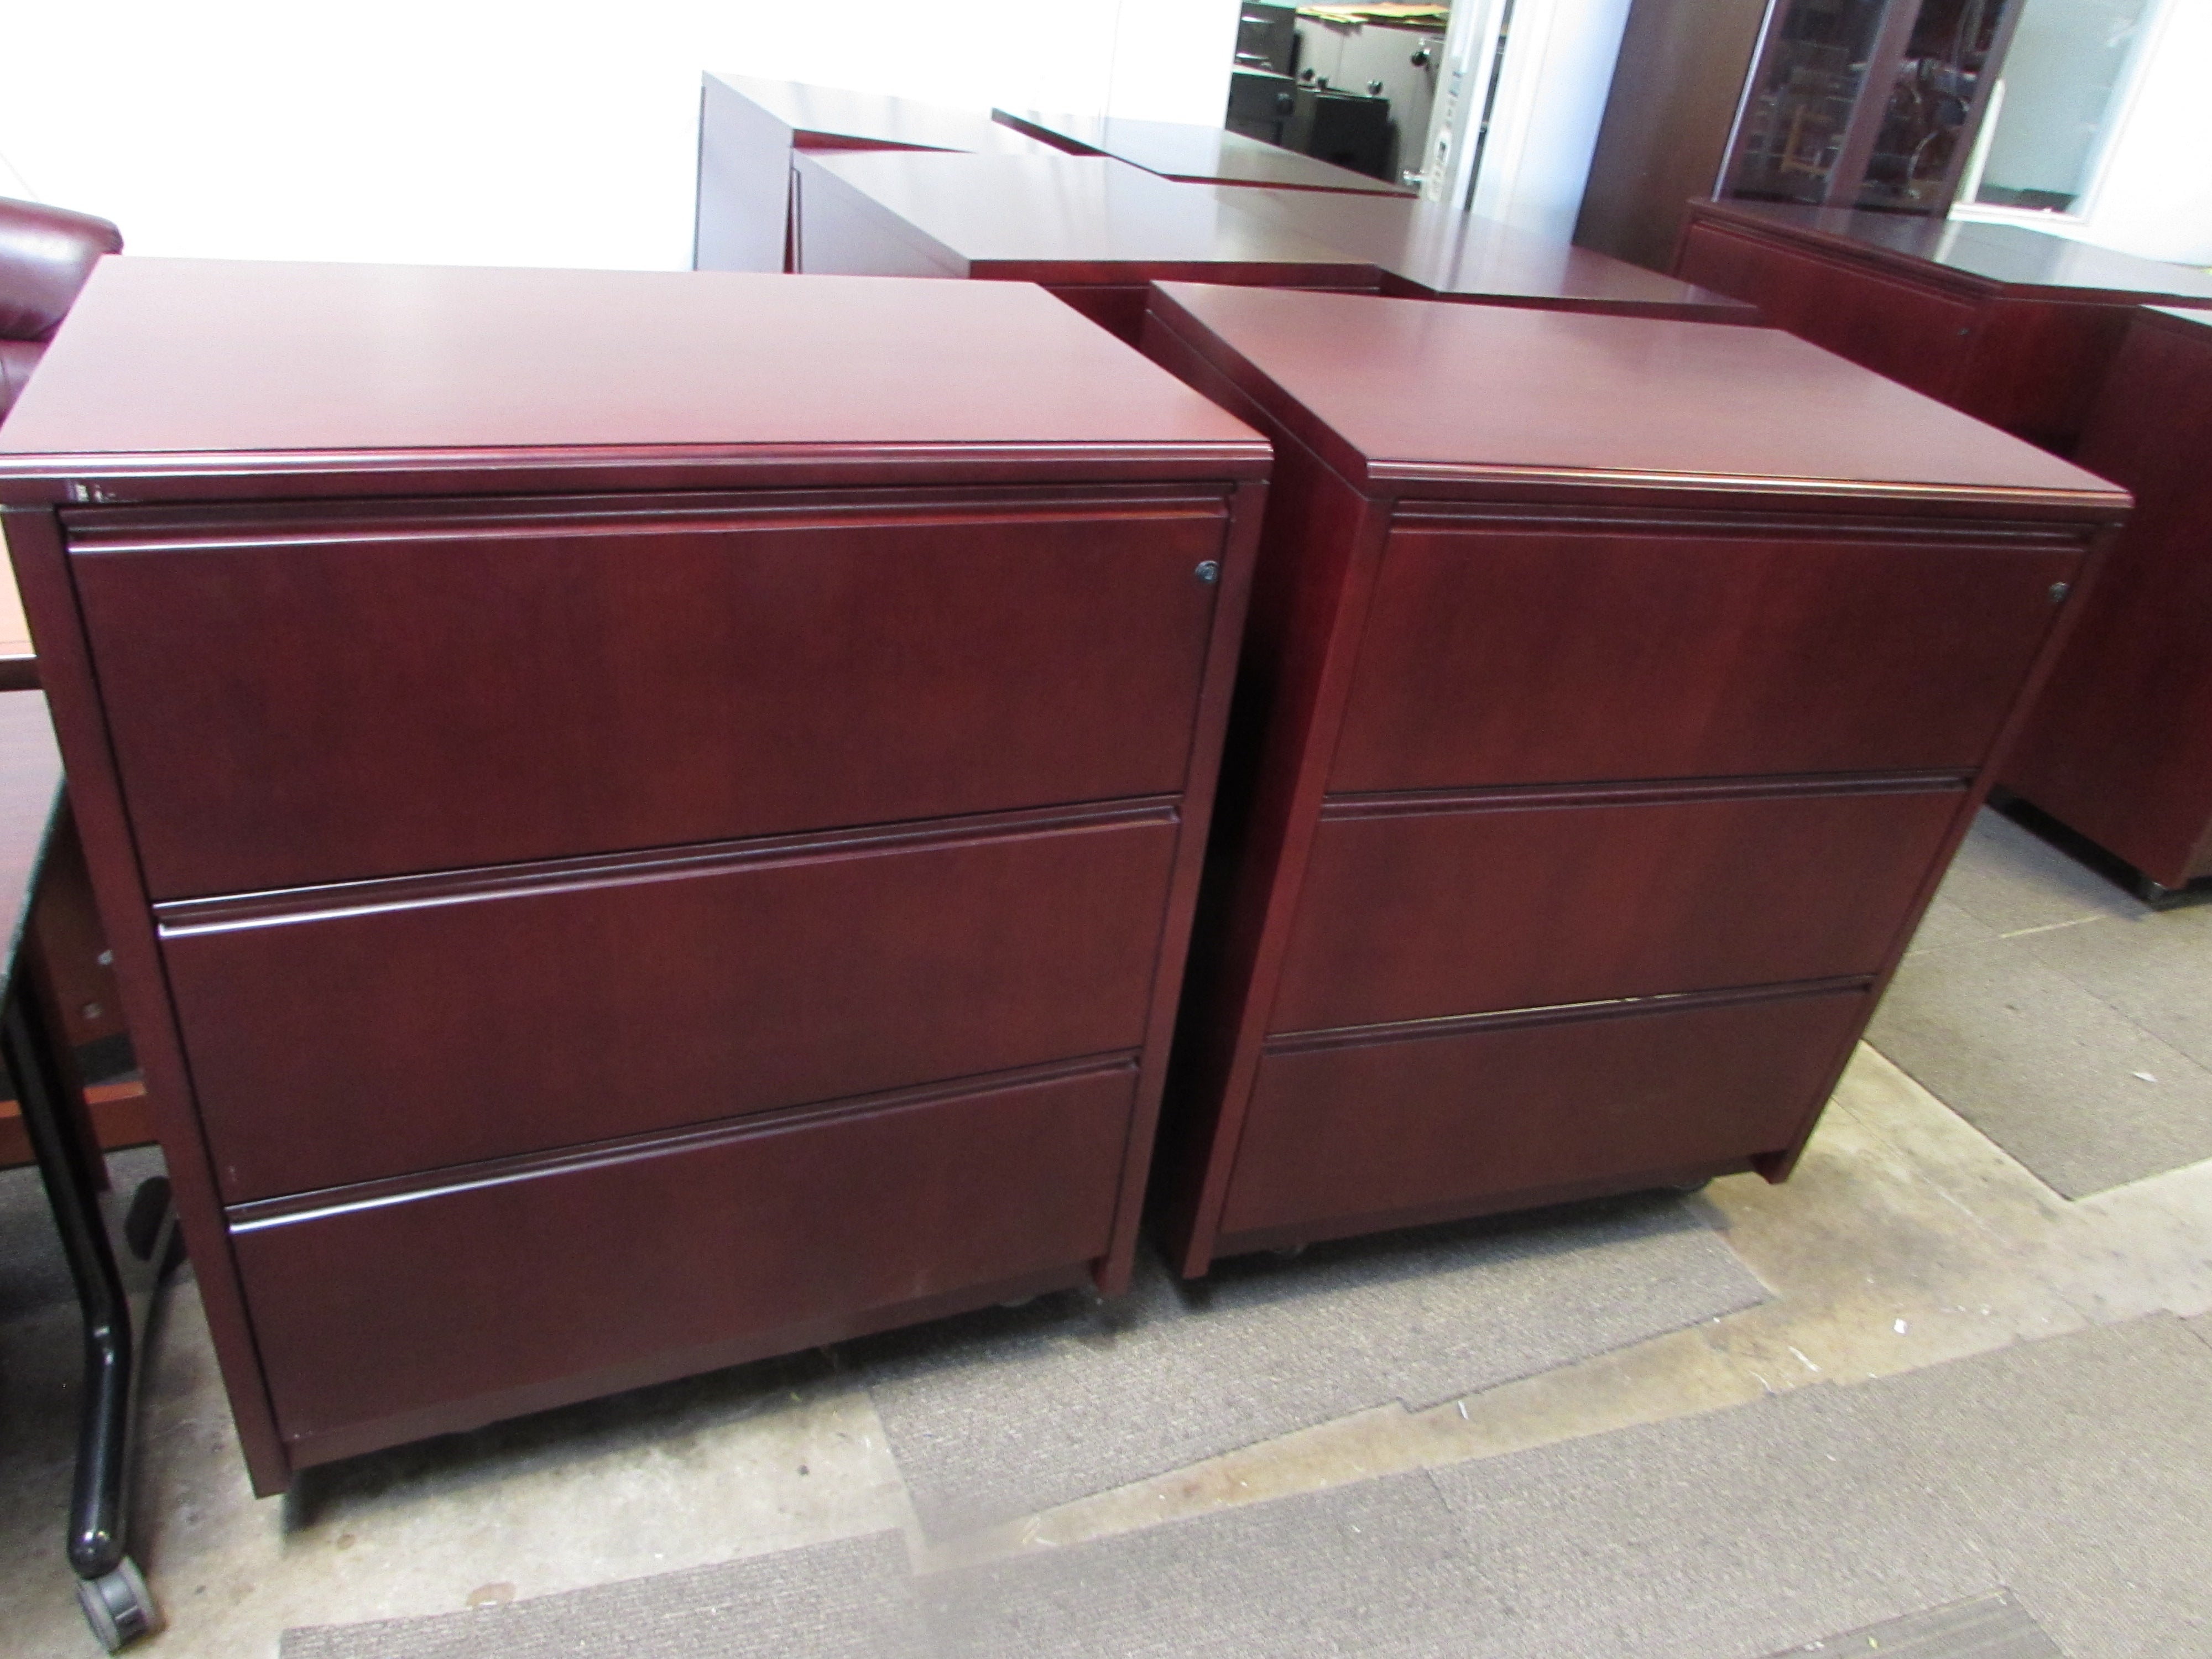 Mahogany Wood 3 Drawer Locking Lateral File Cabinets Recycled Office Furnishings